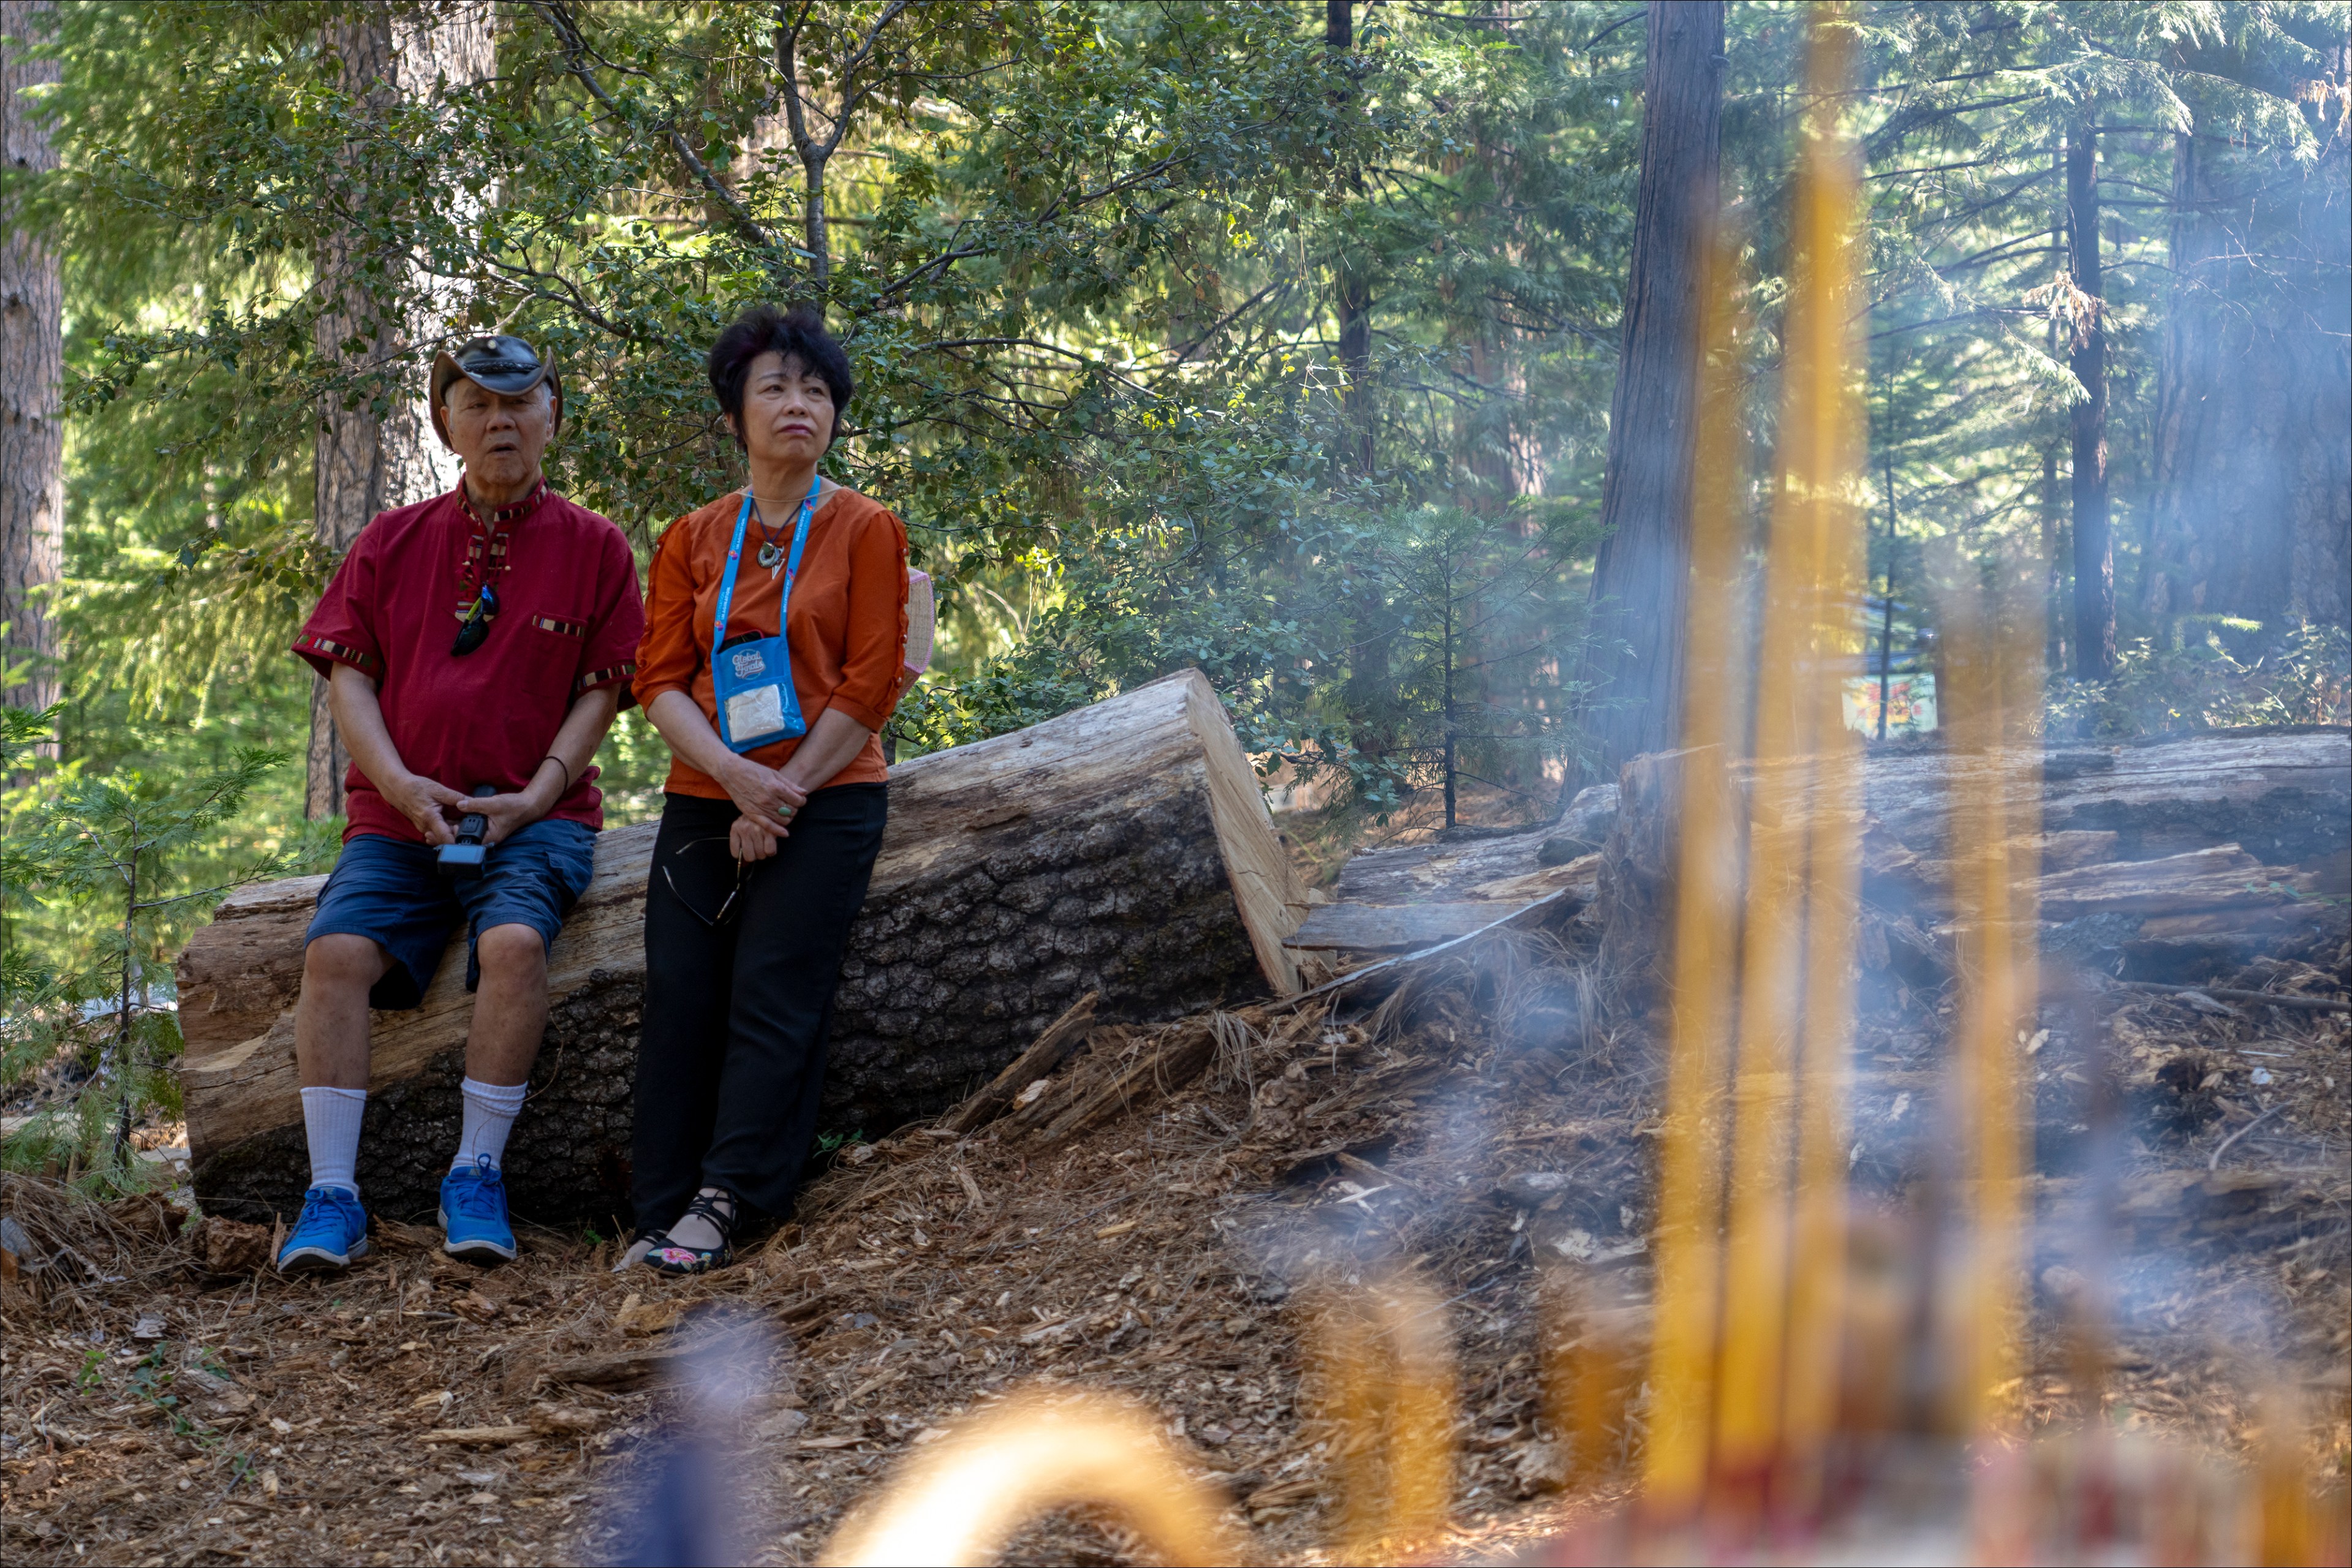 Two elderly people sit on a log in a forest with incense in the foreground.